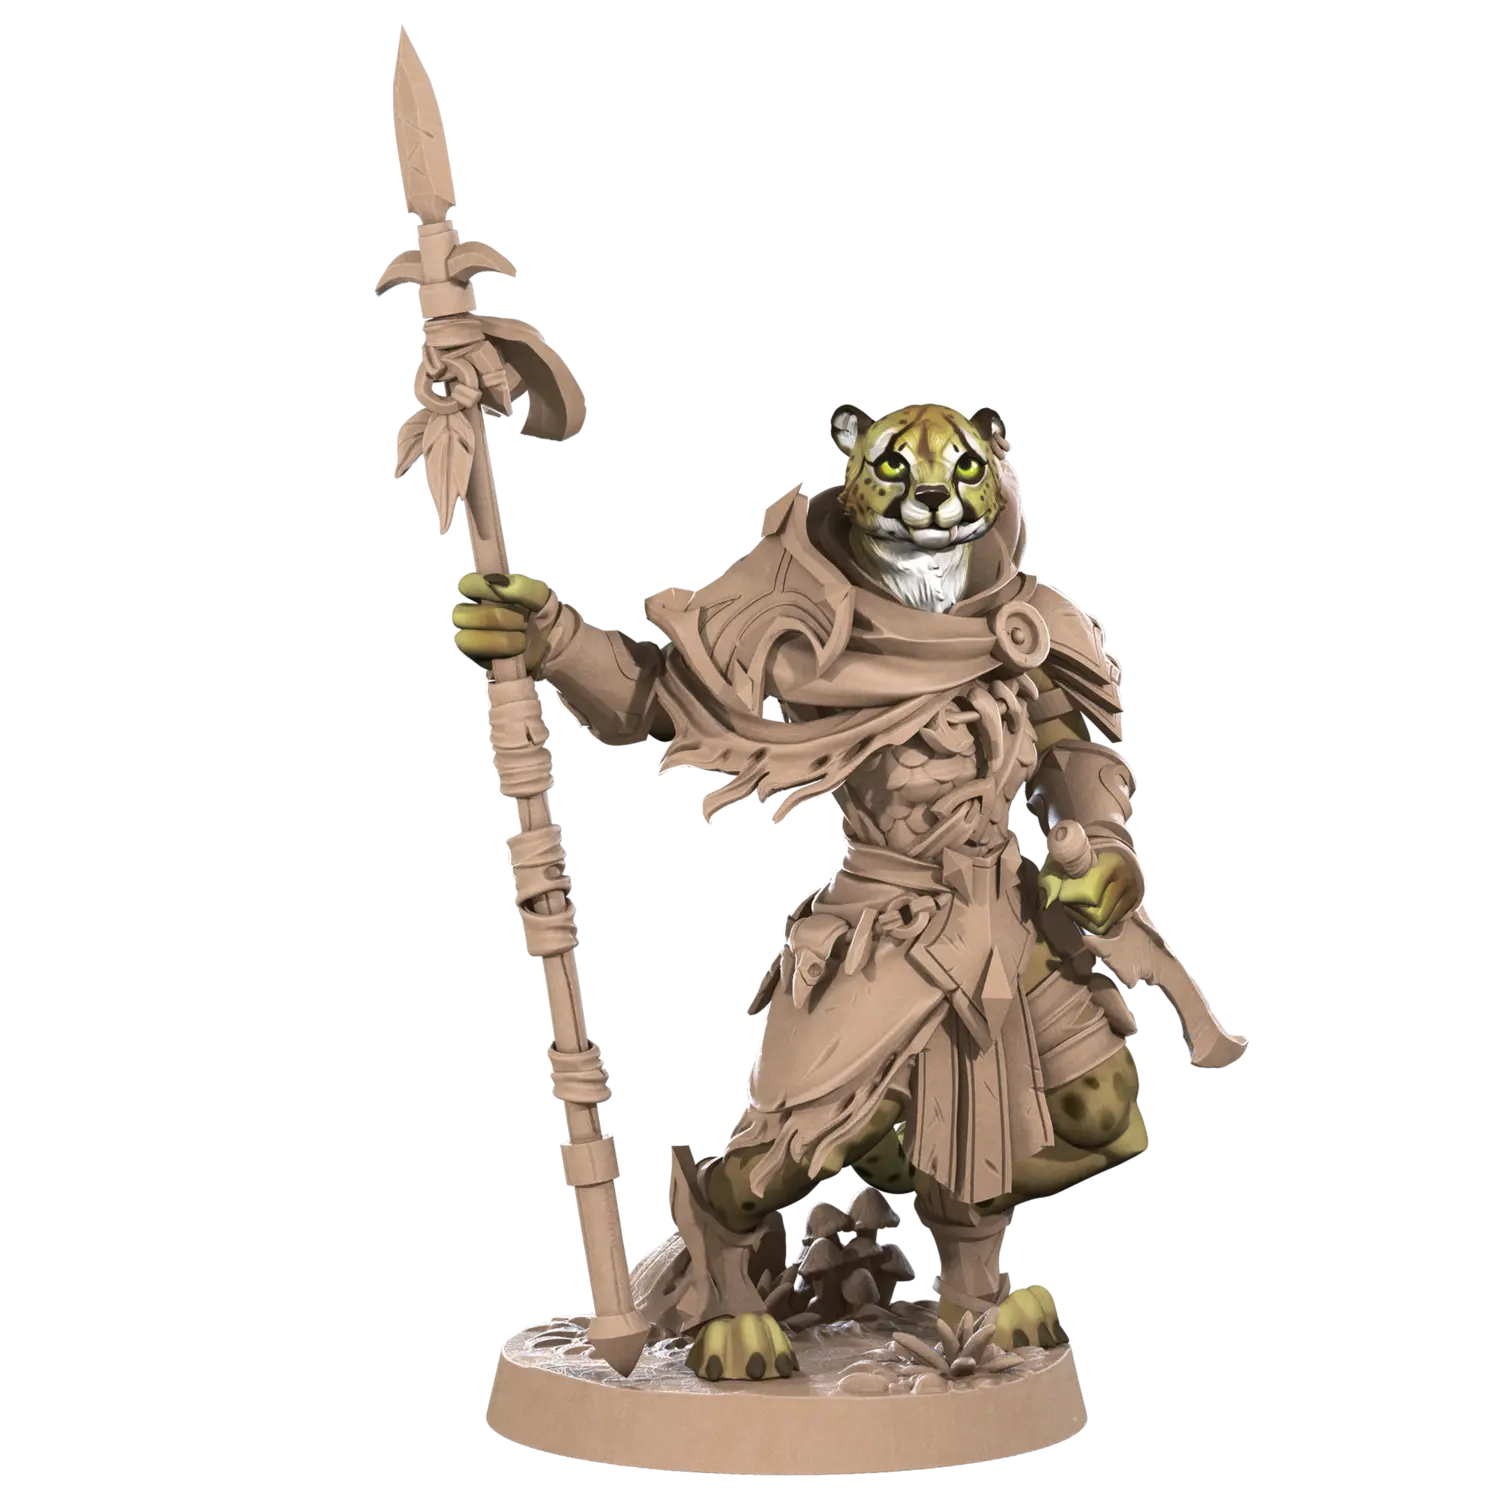 DnD Miniature - Ranger - Tabaxi Sapphire  Miniature - Ranger - Tabaxi sold by DoubleHitShop